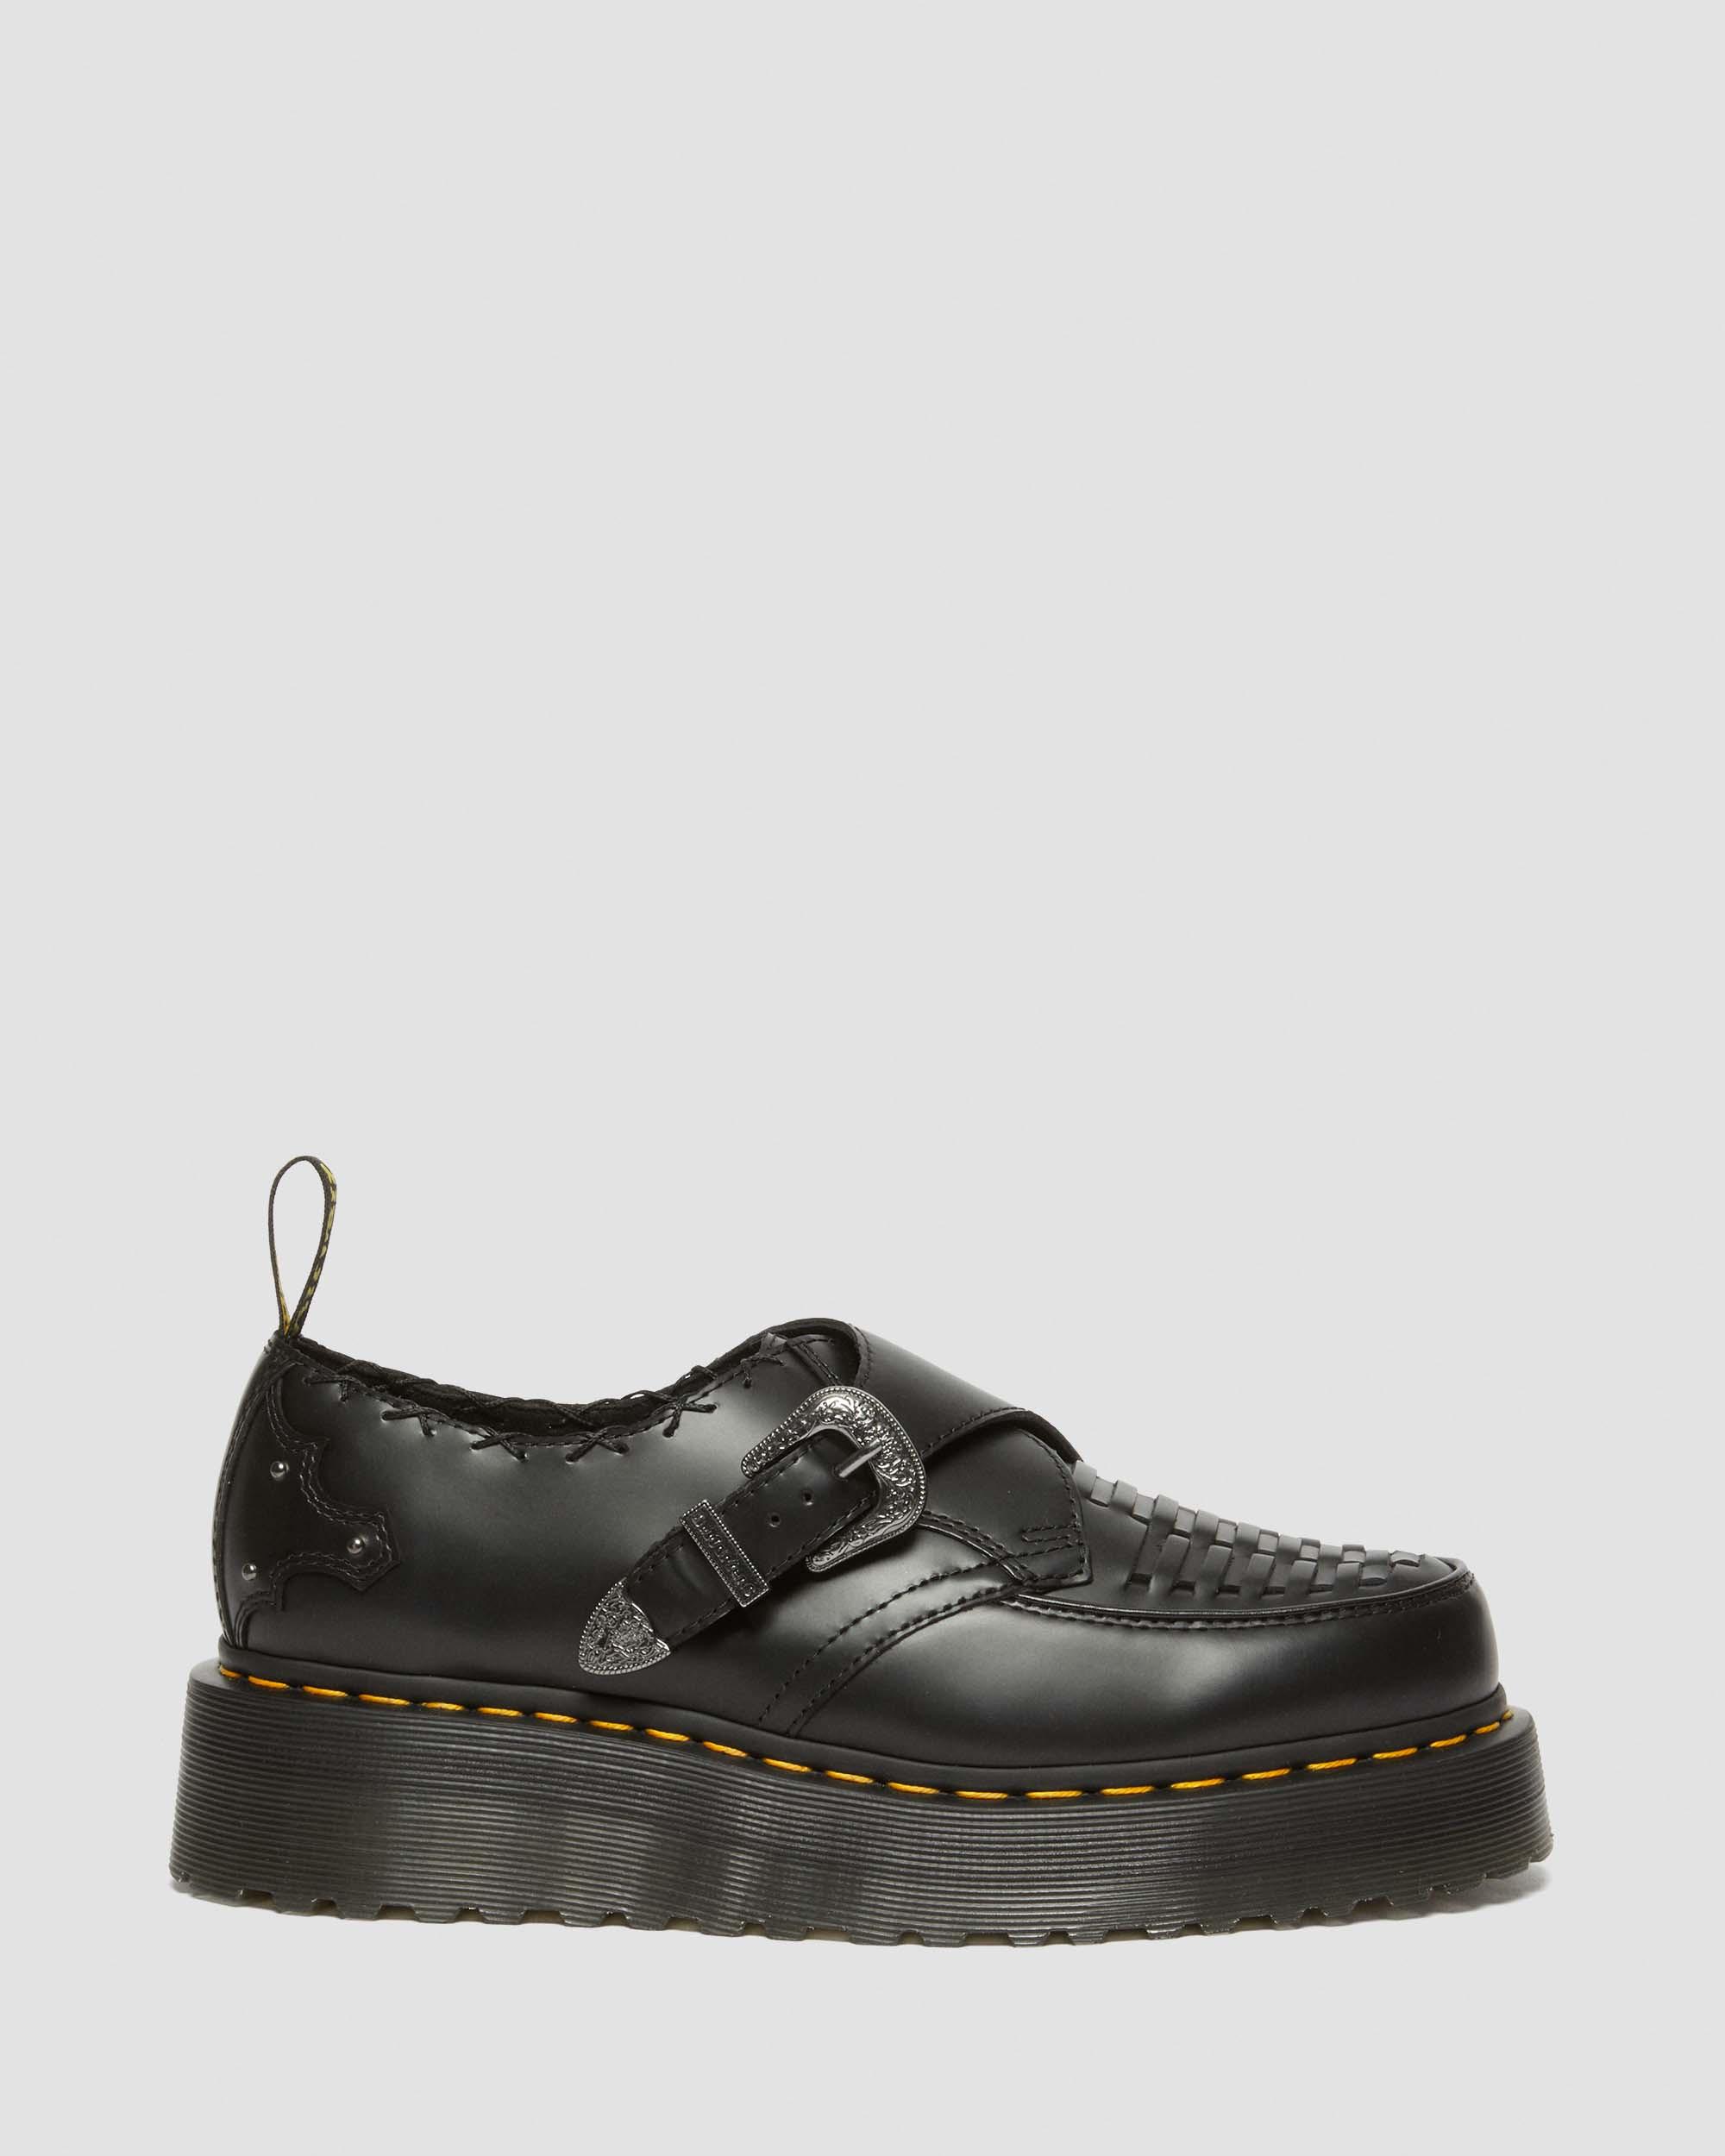 Ramsey Woven Smooth Leather Platform Creepers in Black